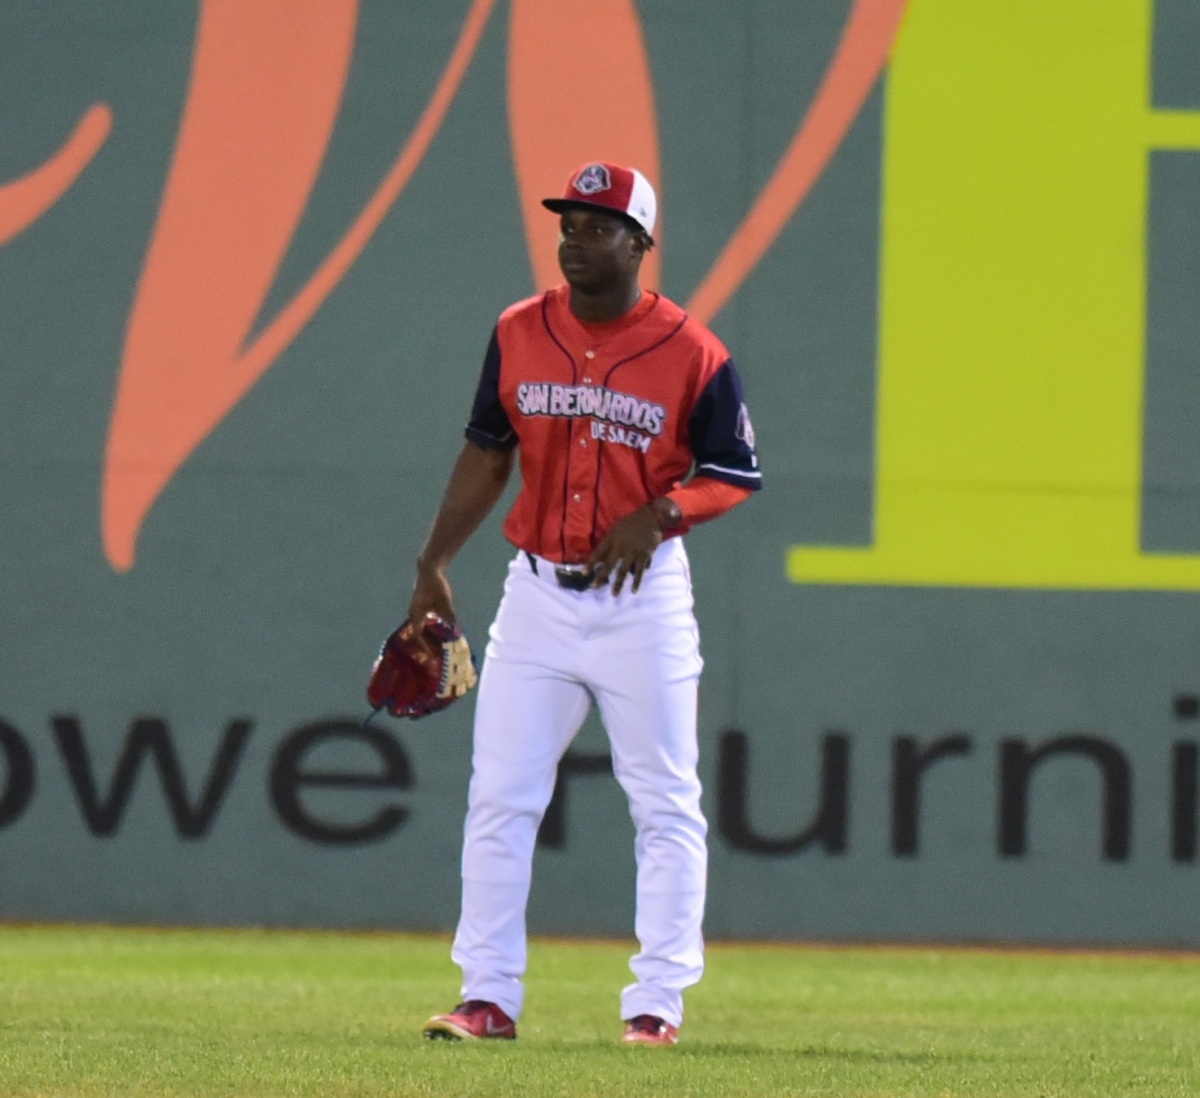 Where do things stand with Red Sox outfield prospect Gilberto Jiménez heading into 2022 season?